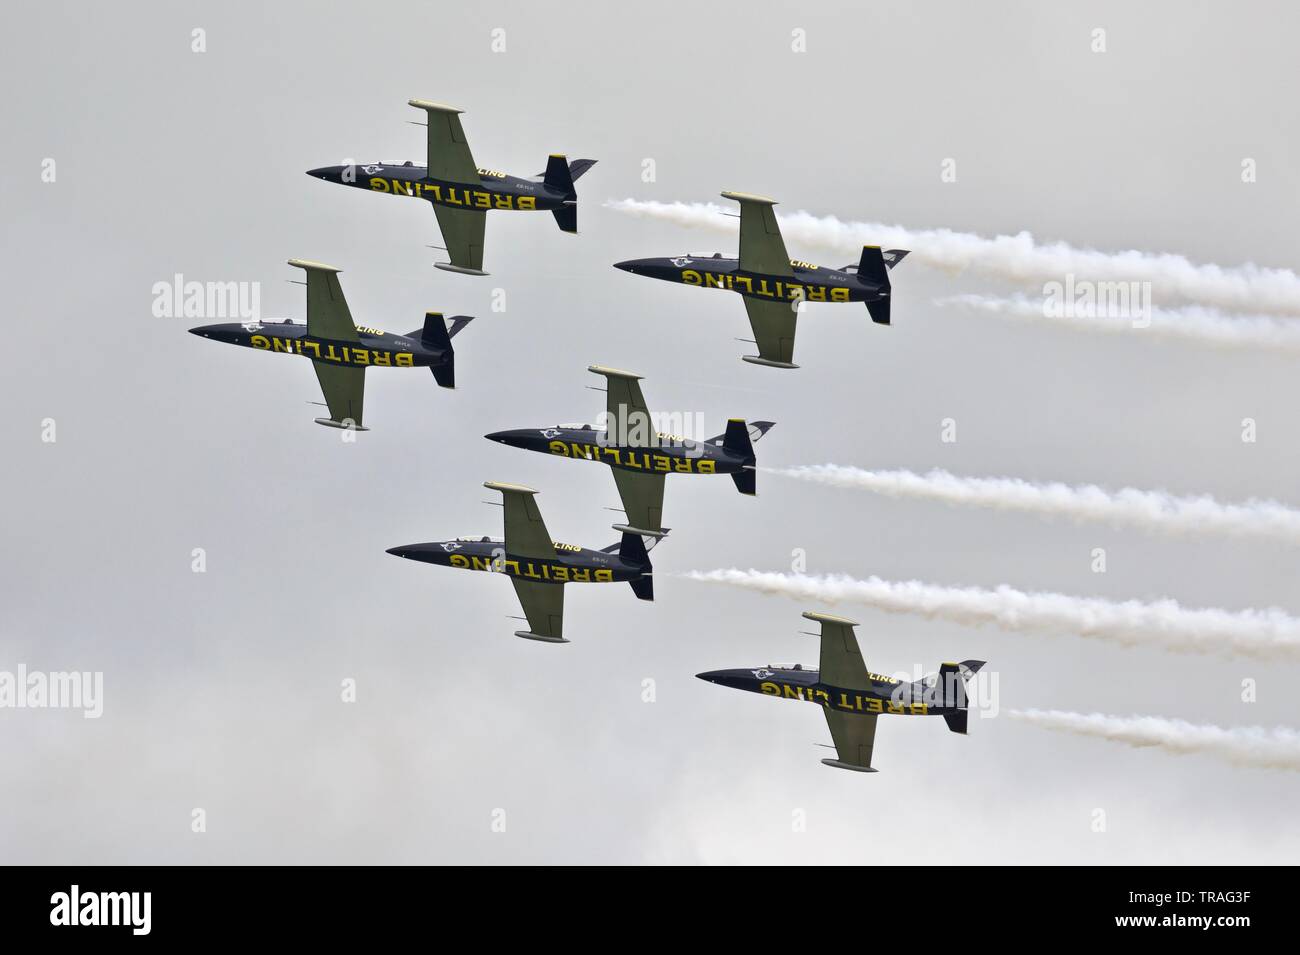 The Breitling Jet Team - Czech Aero L-39 Albatros jets performing at the 2019 Duxford Air Festival Stock Photo